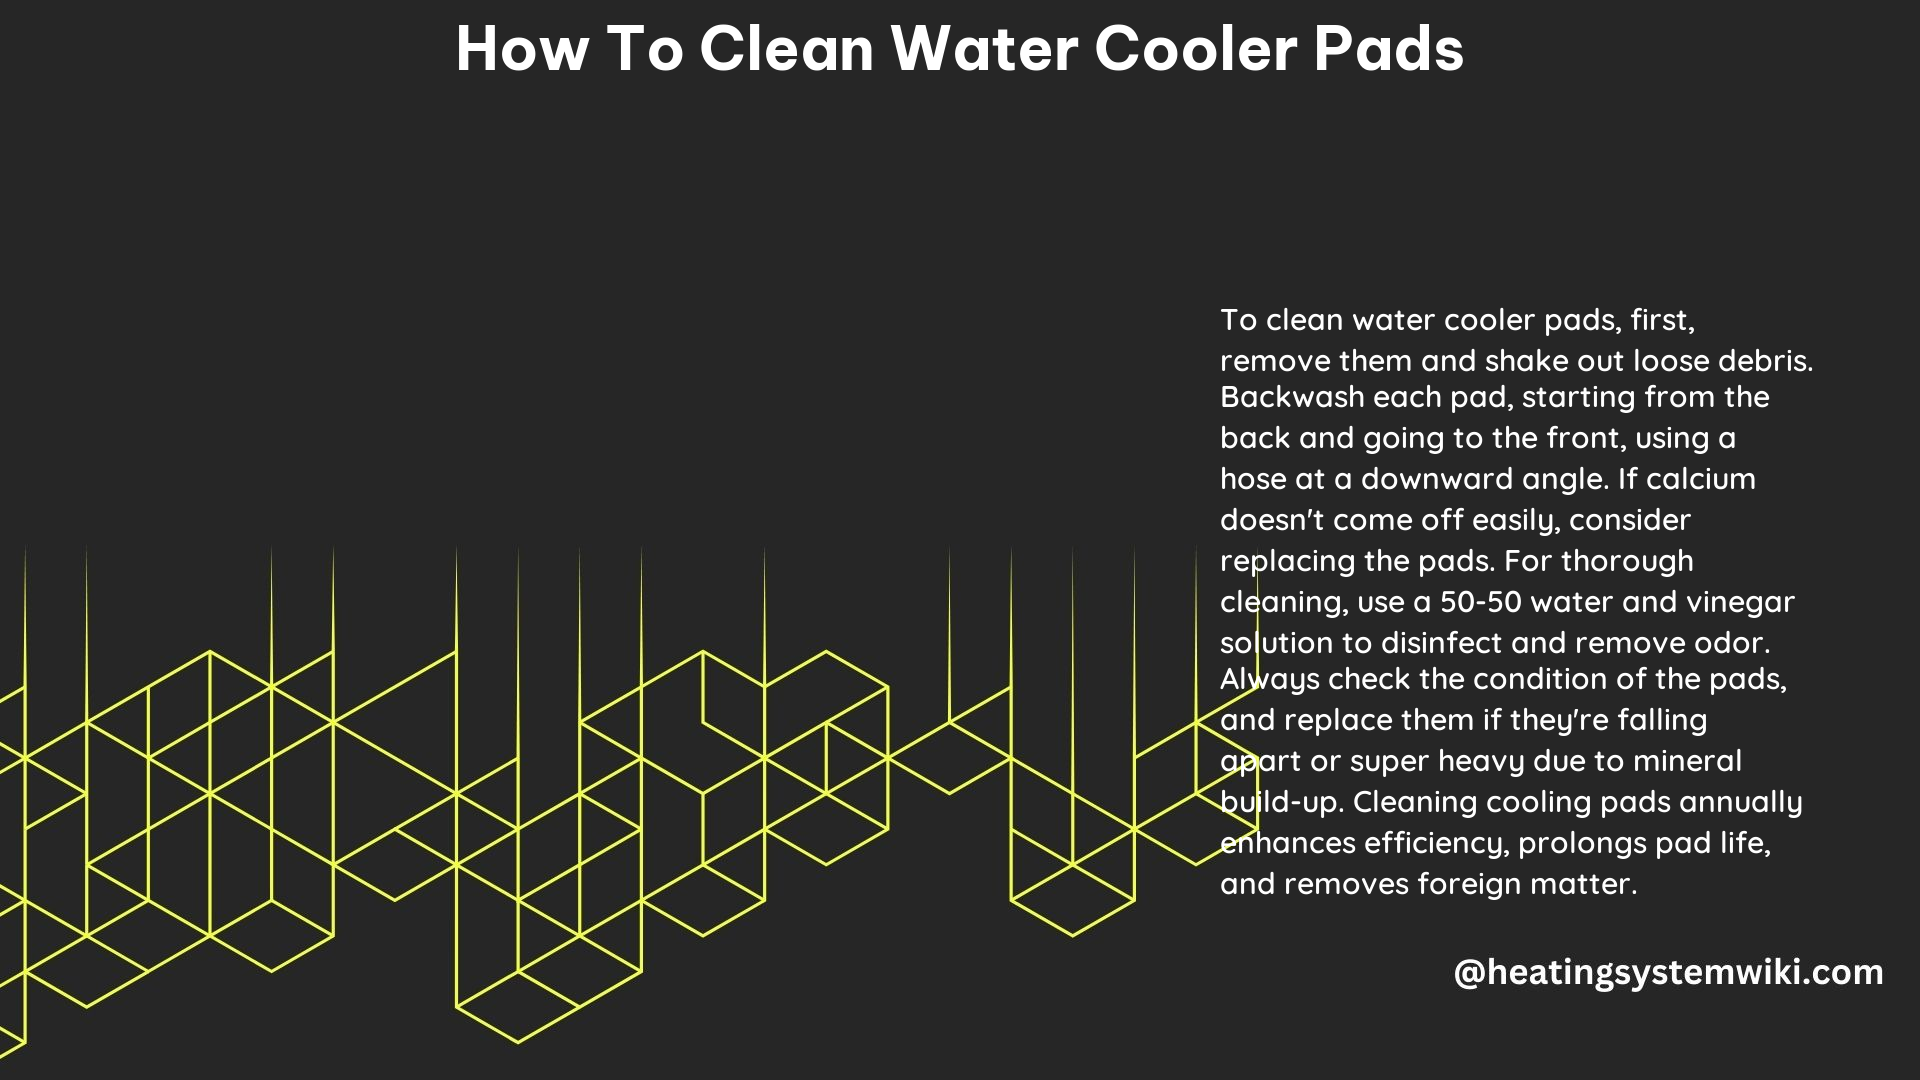 How to Clean Water Cooler Pads